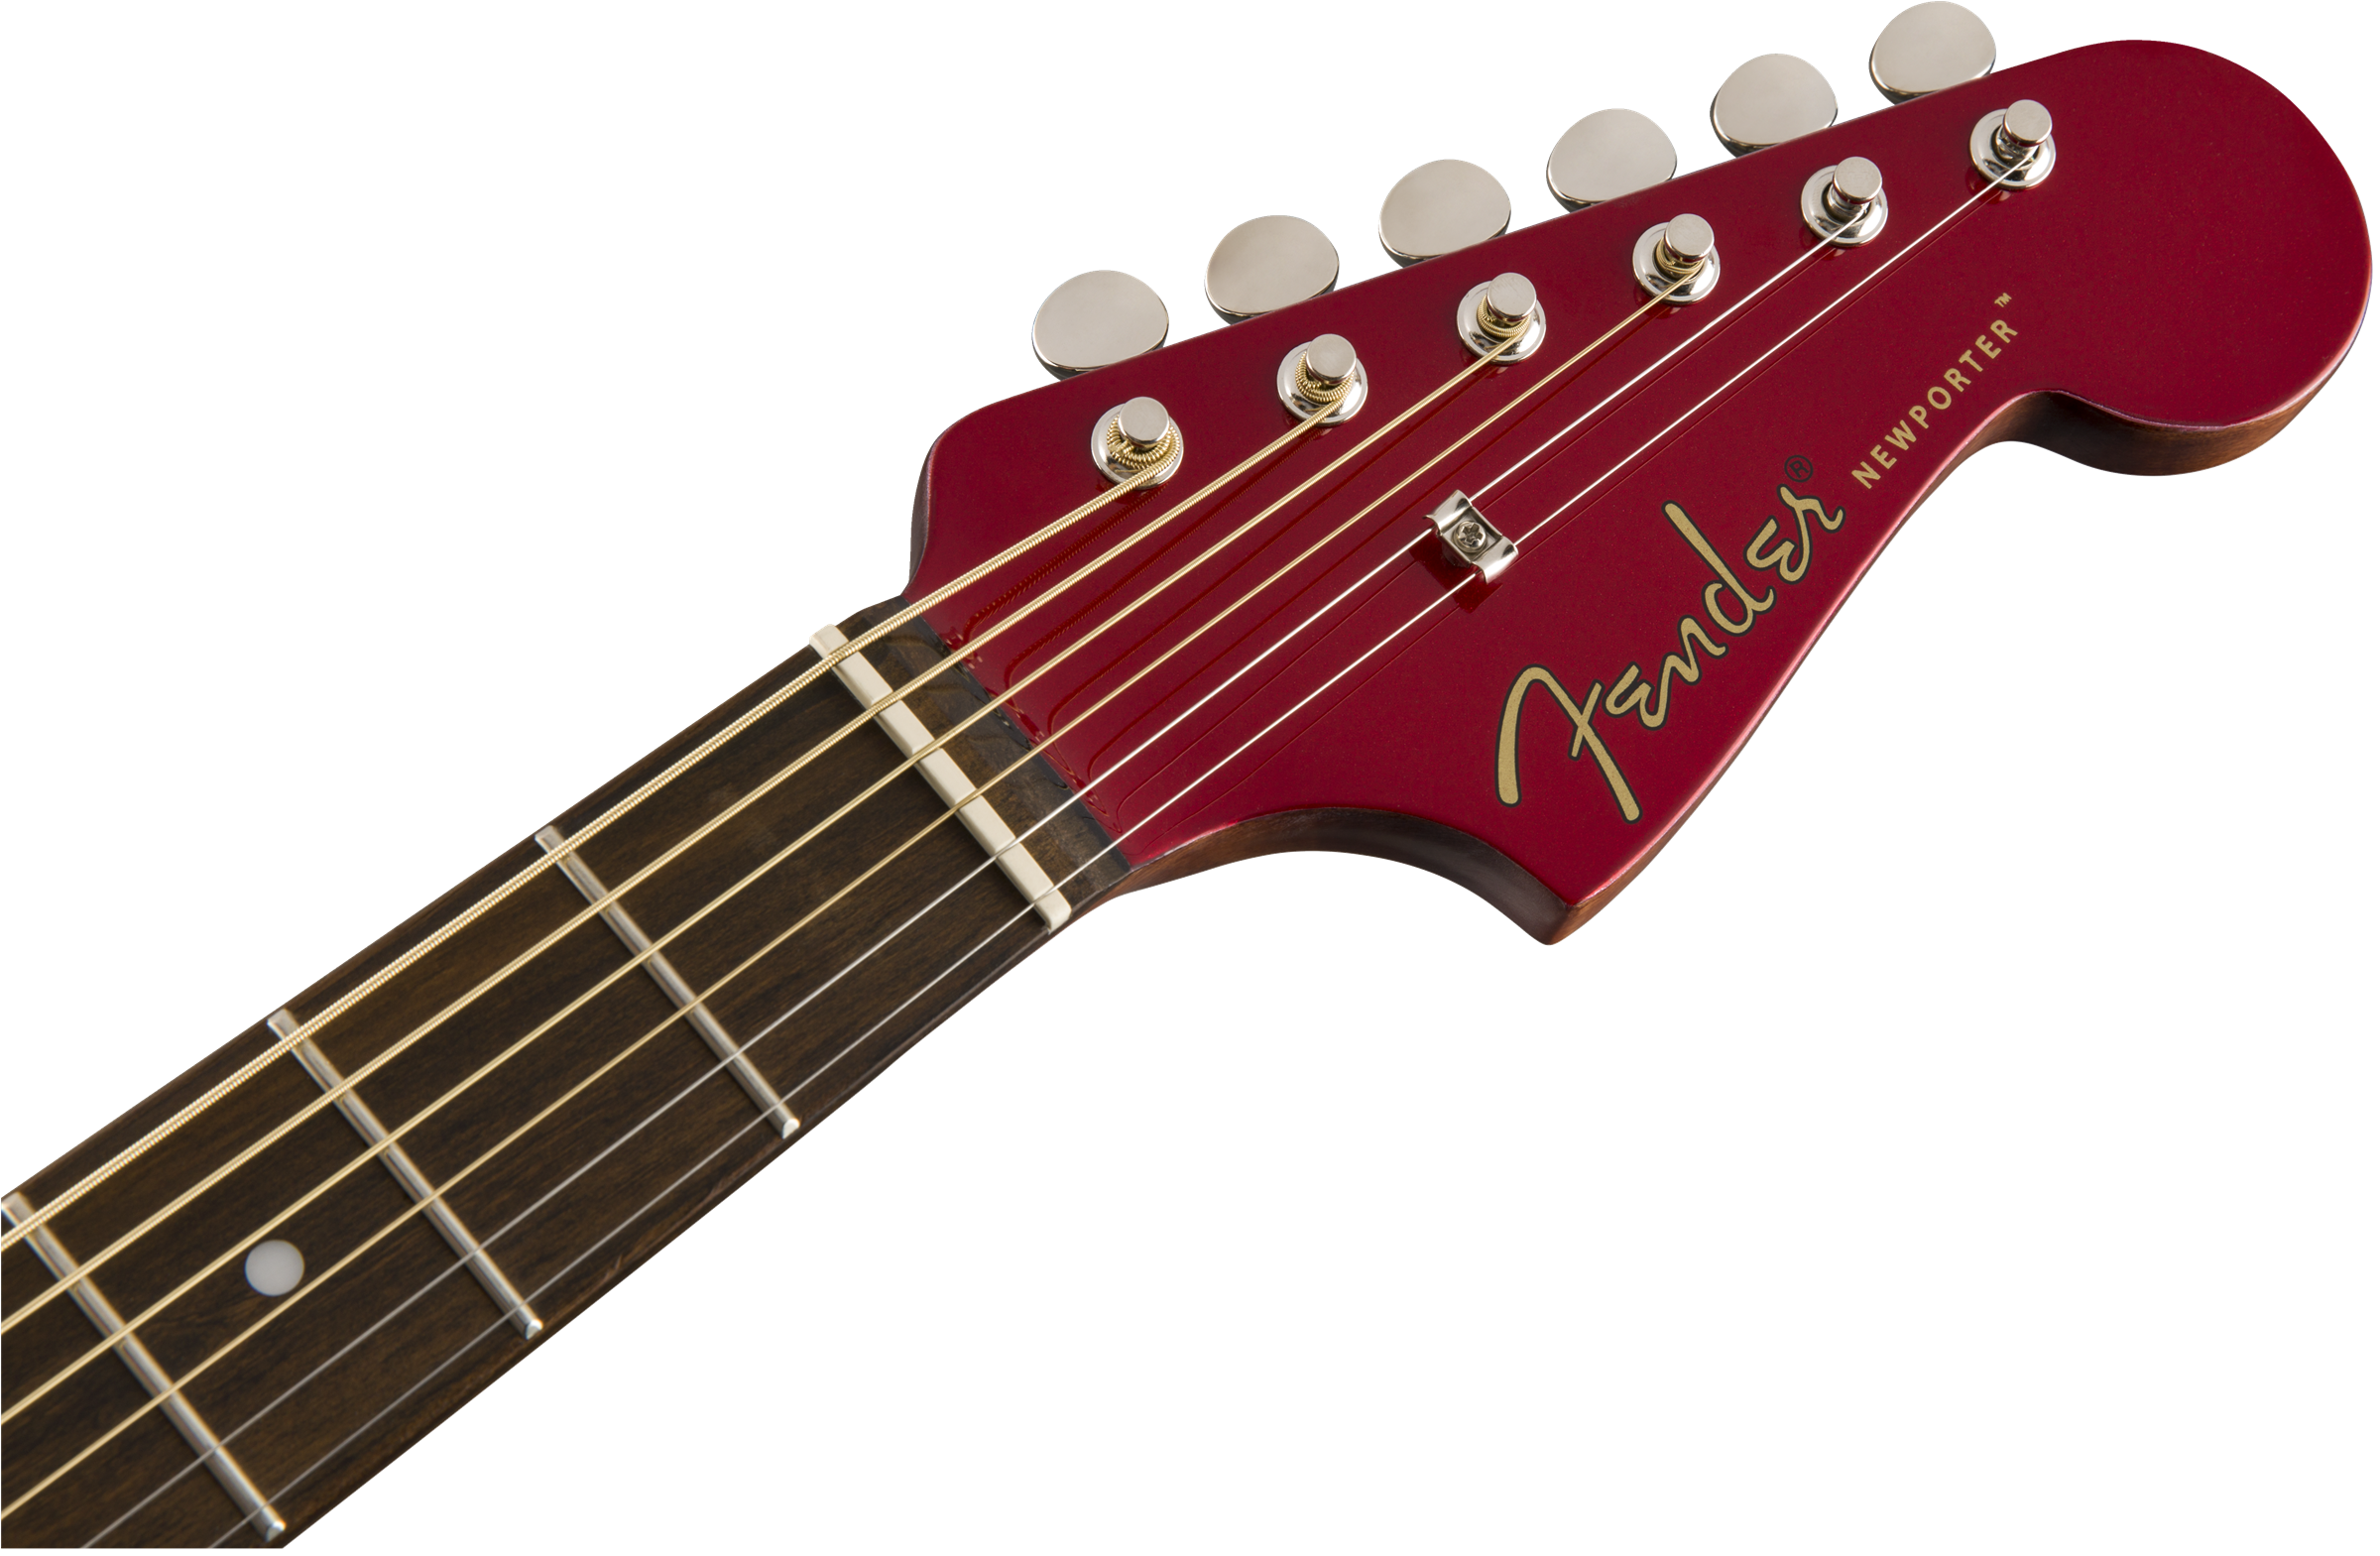 Fender Newporter Player Auditorium Cw Epicea Acajou Wal - Candy Apple Red - Electro acoustic guitar - Variation 6